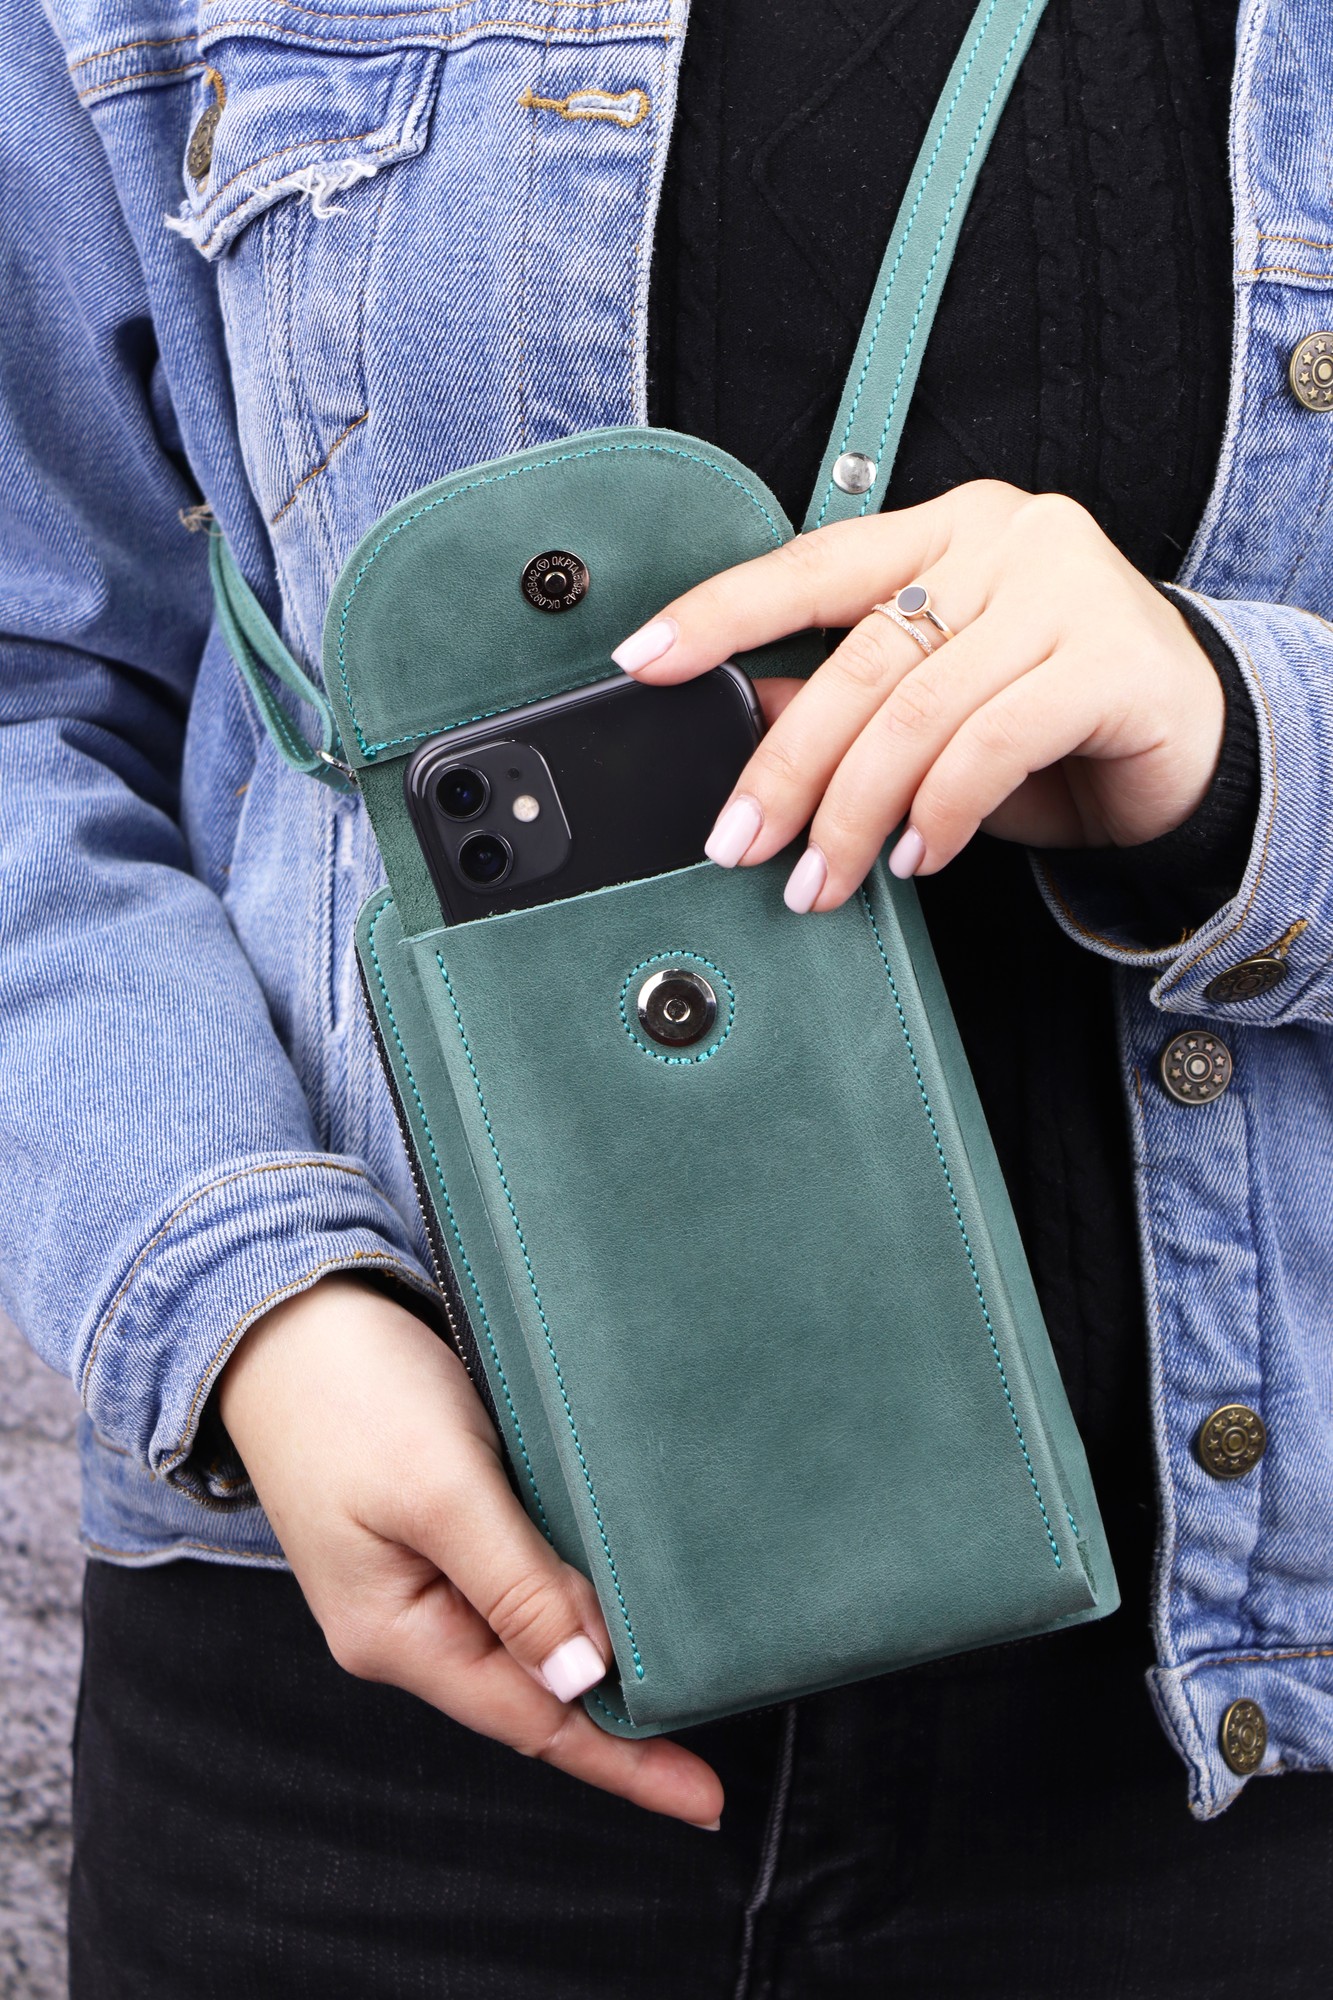 Crossbody Cell Phone Purse Mobile Phone Bag -COLL- with Adjustable Leather Strap in Green Waxed Canvas Made by HOLMgoods